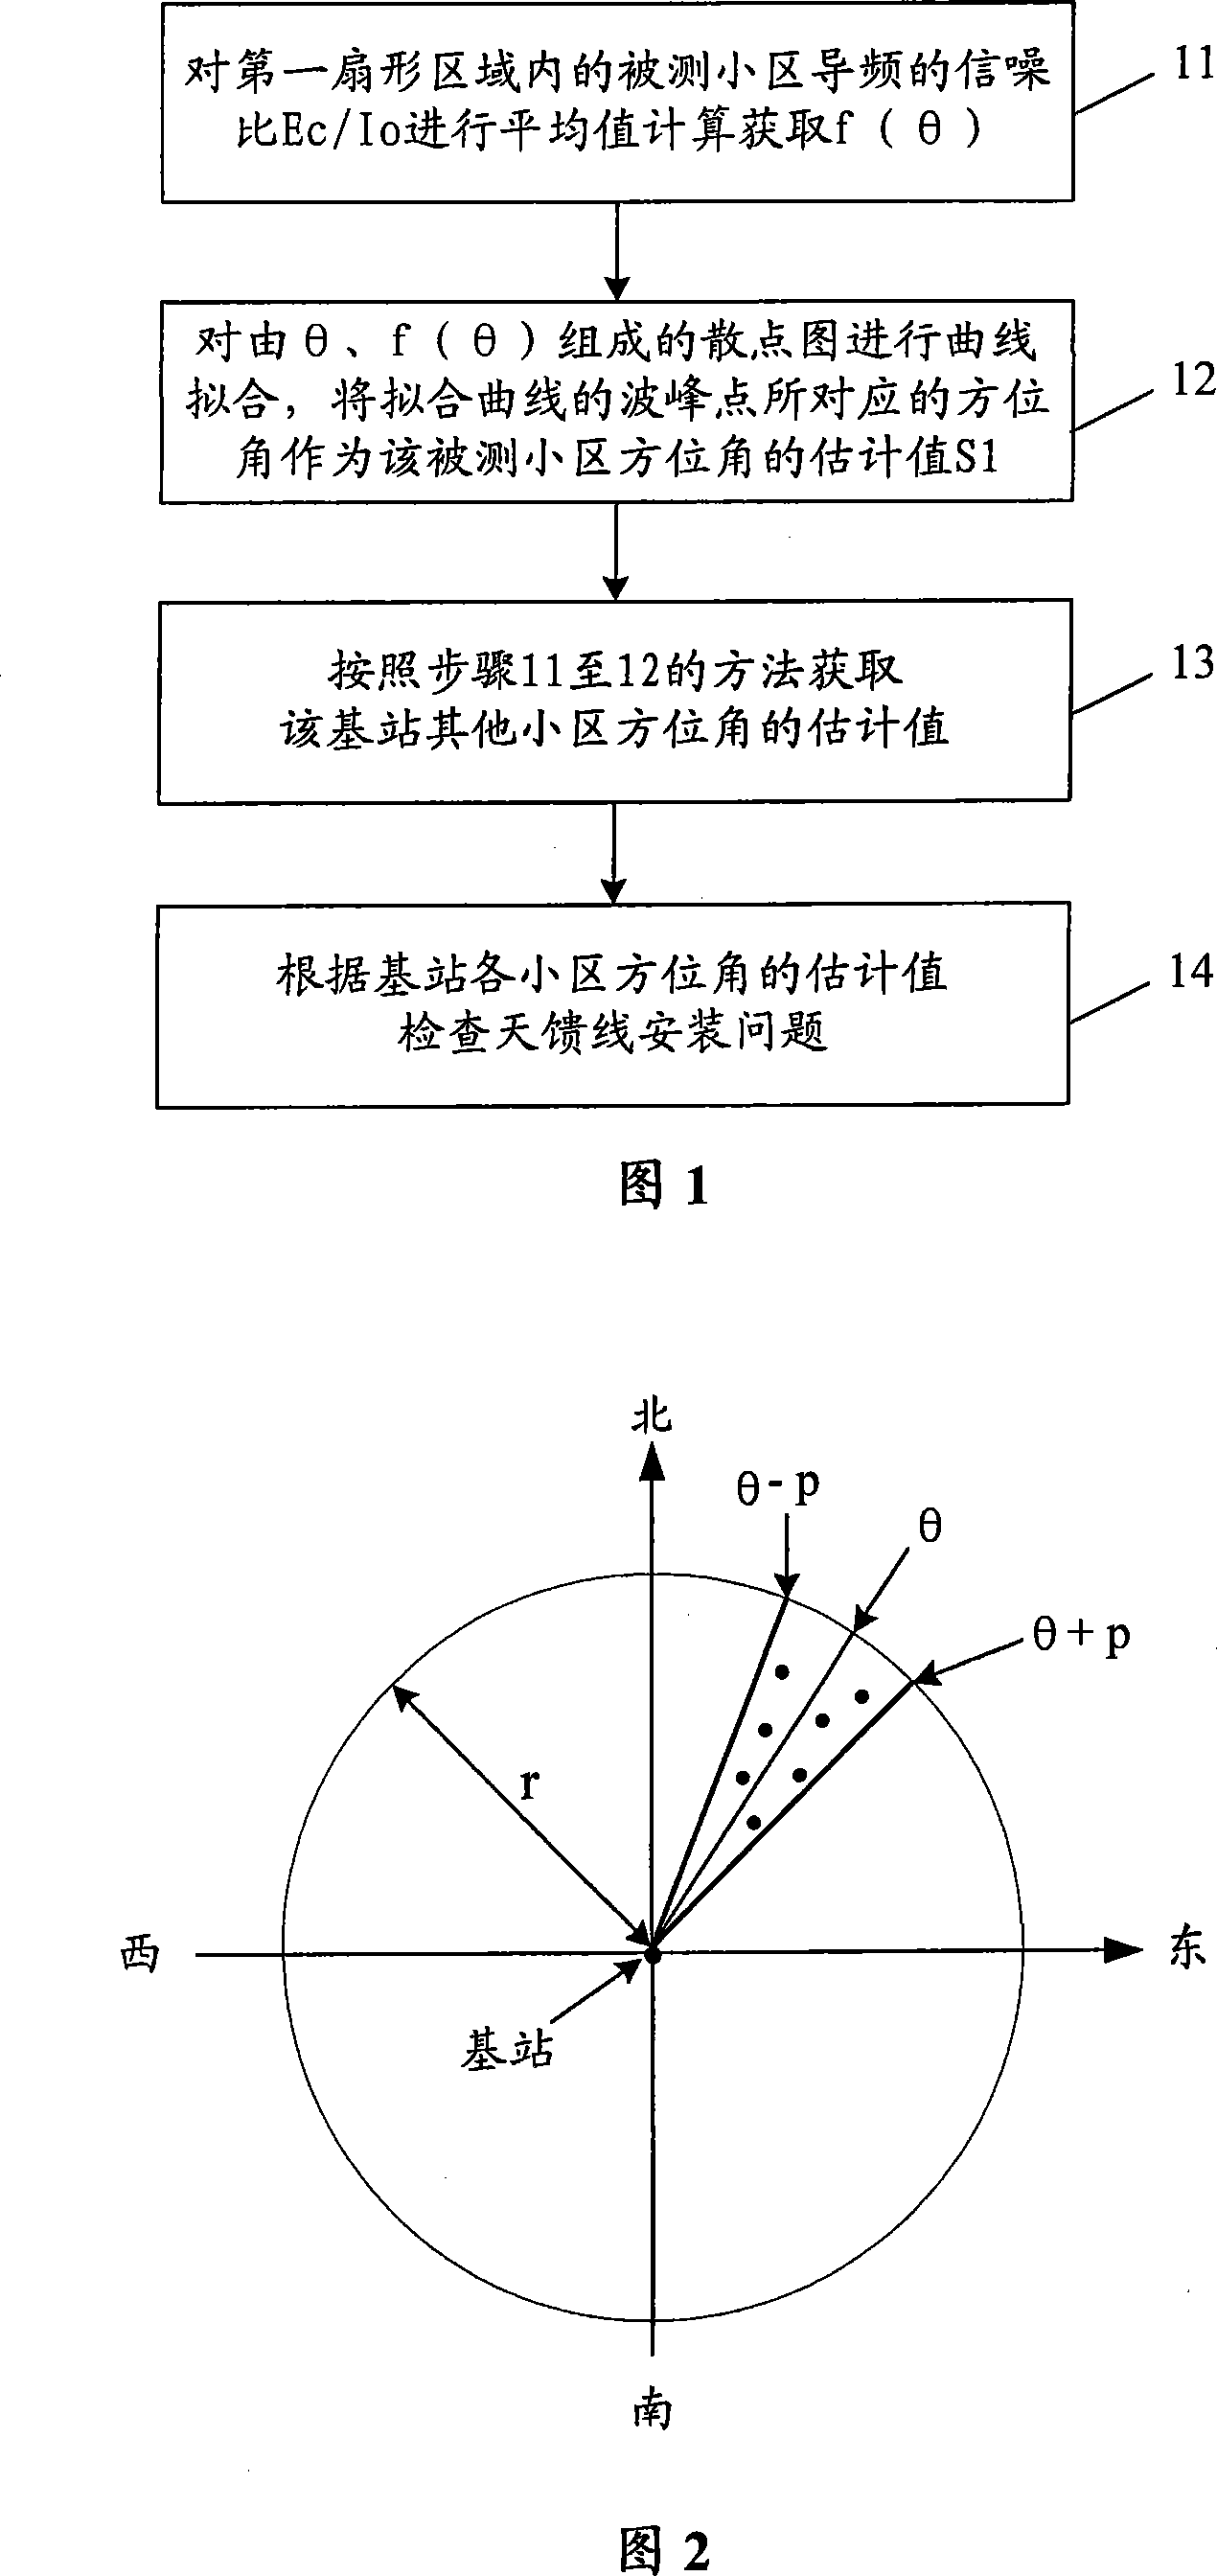 Method and apparatus for detecting antenna-feed installation problem